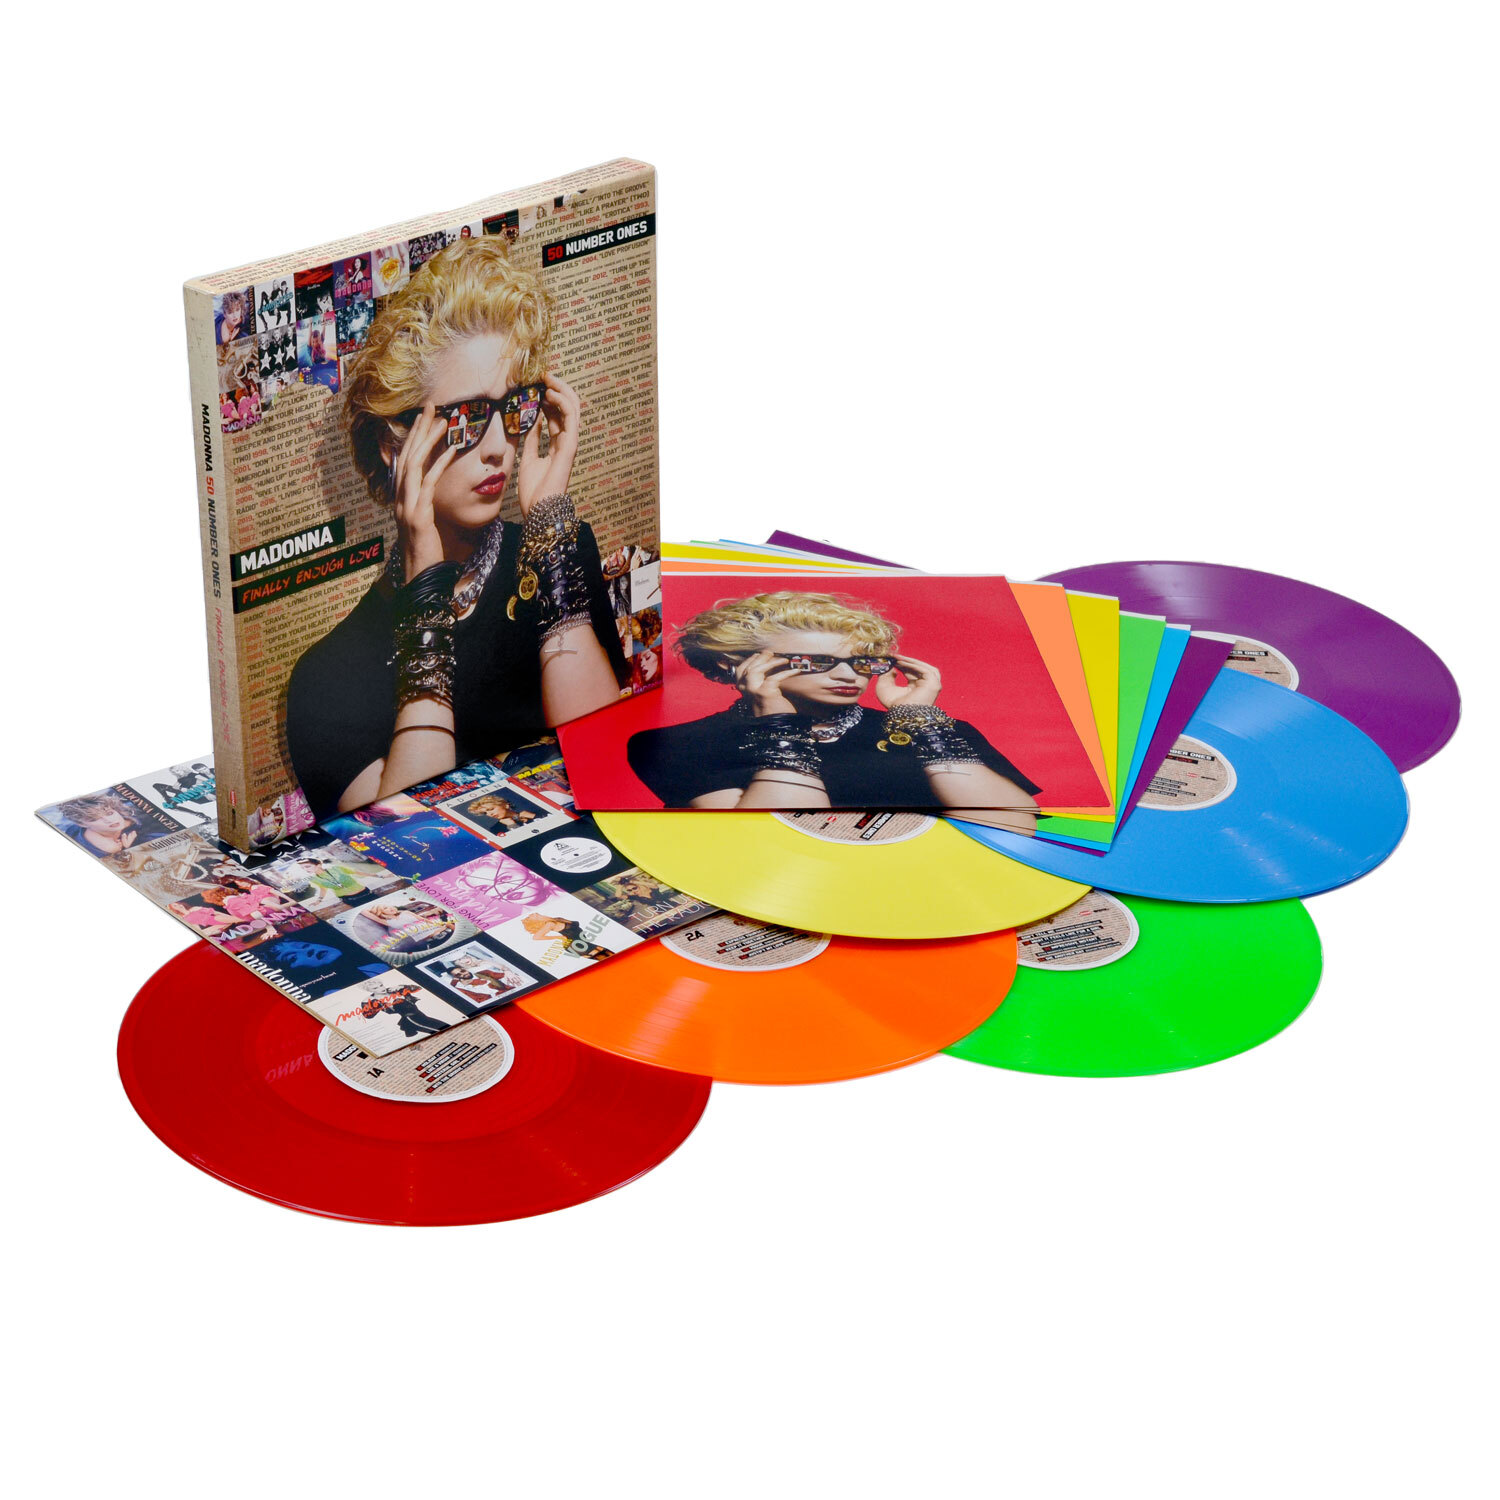 Bedtime Stories Madonna Limited Edition Numbered Pink Vinyl